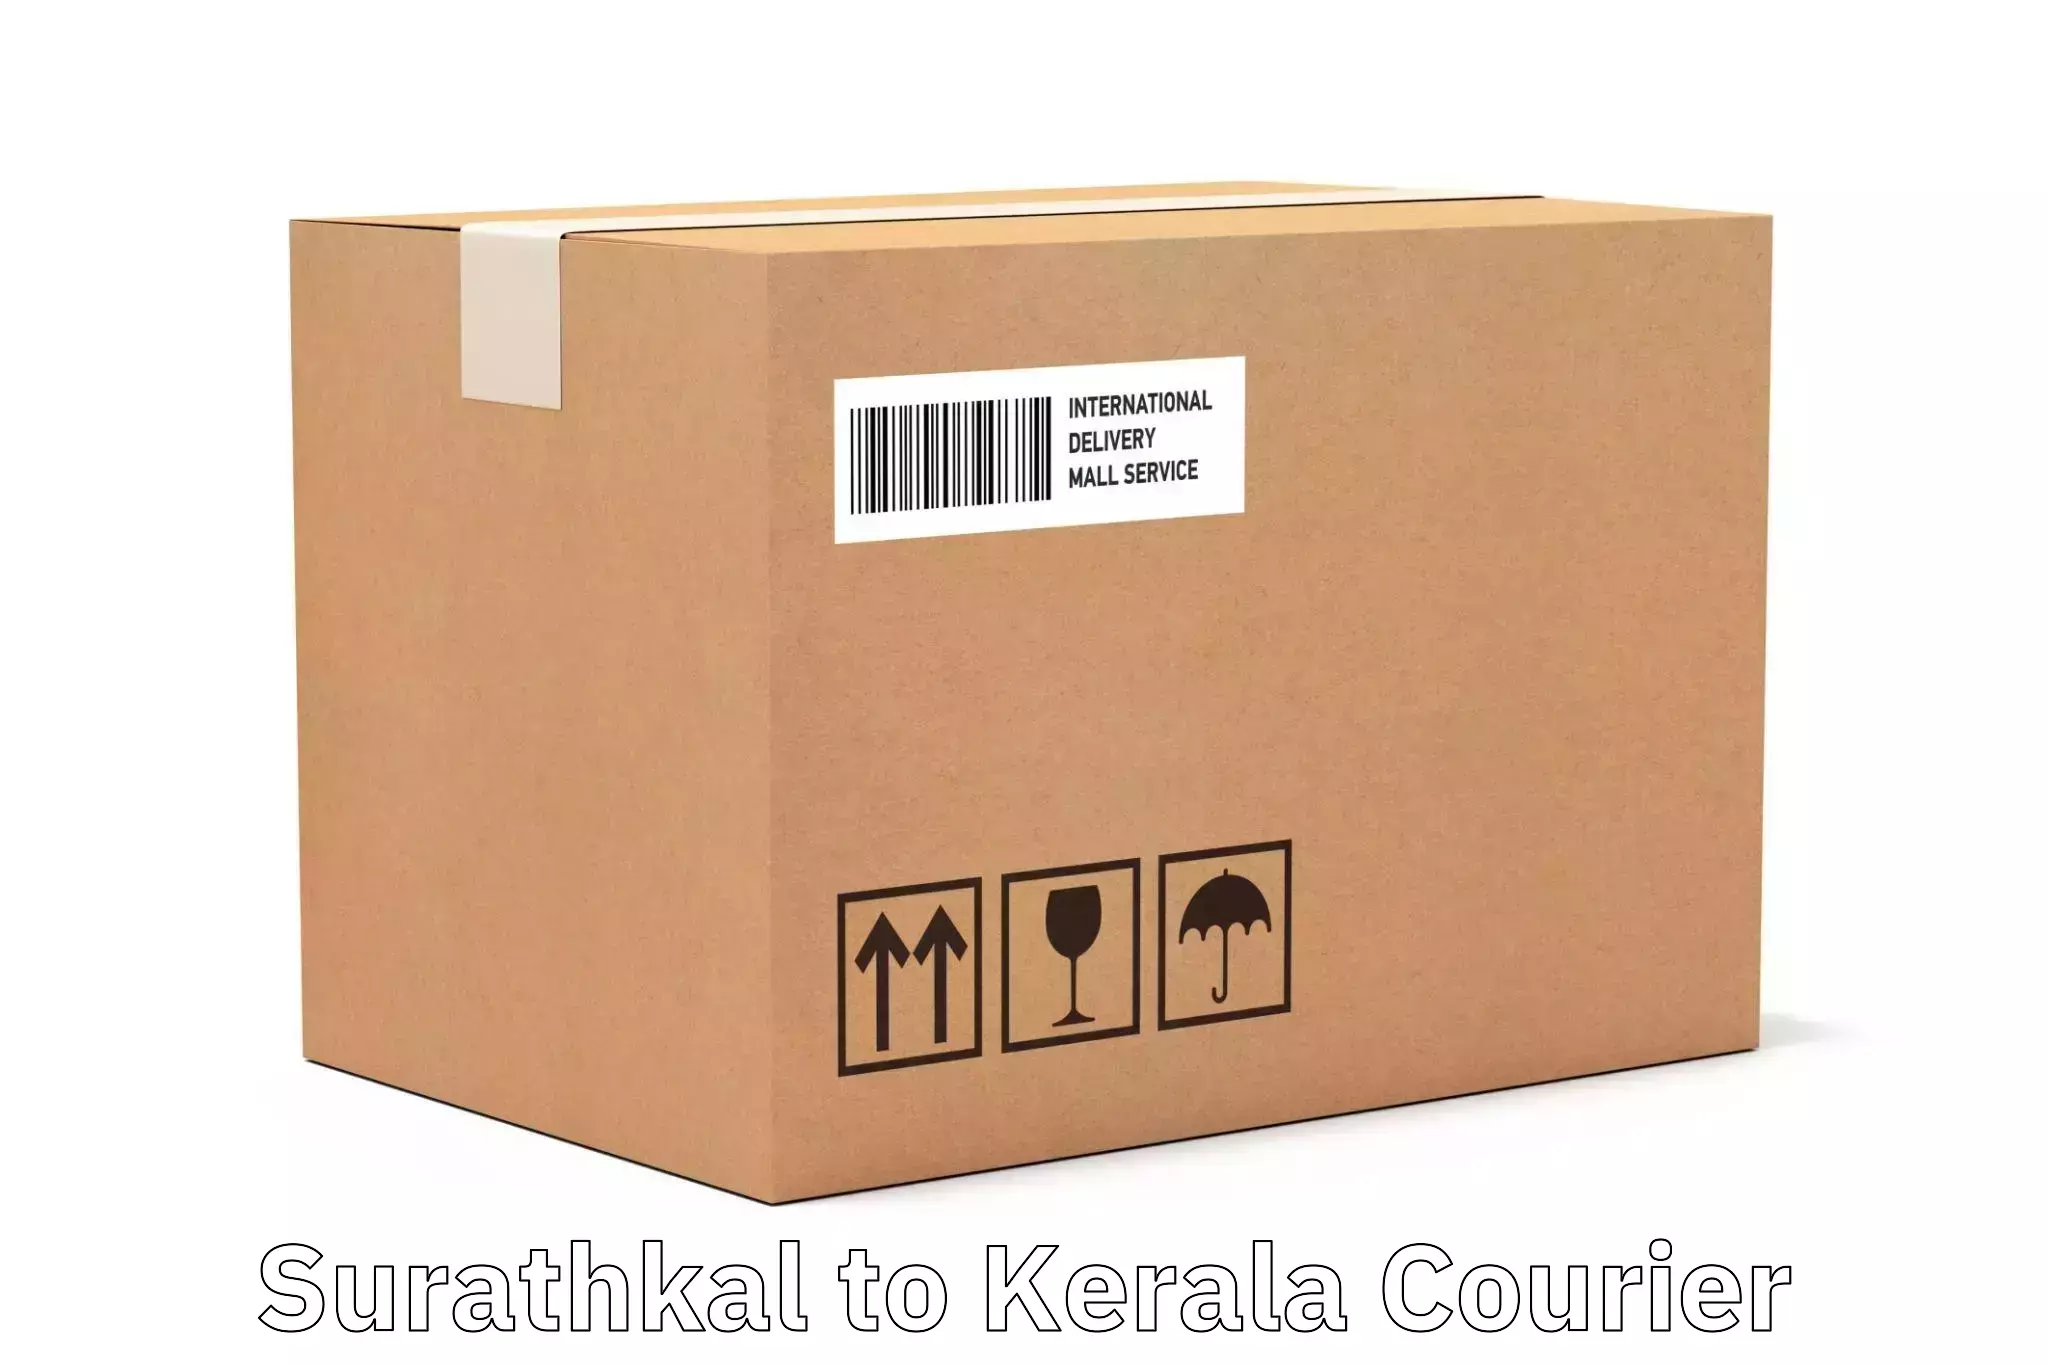 Express package services Surathkal to Cochin Port Kochi